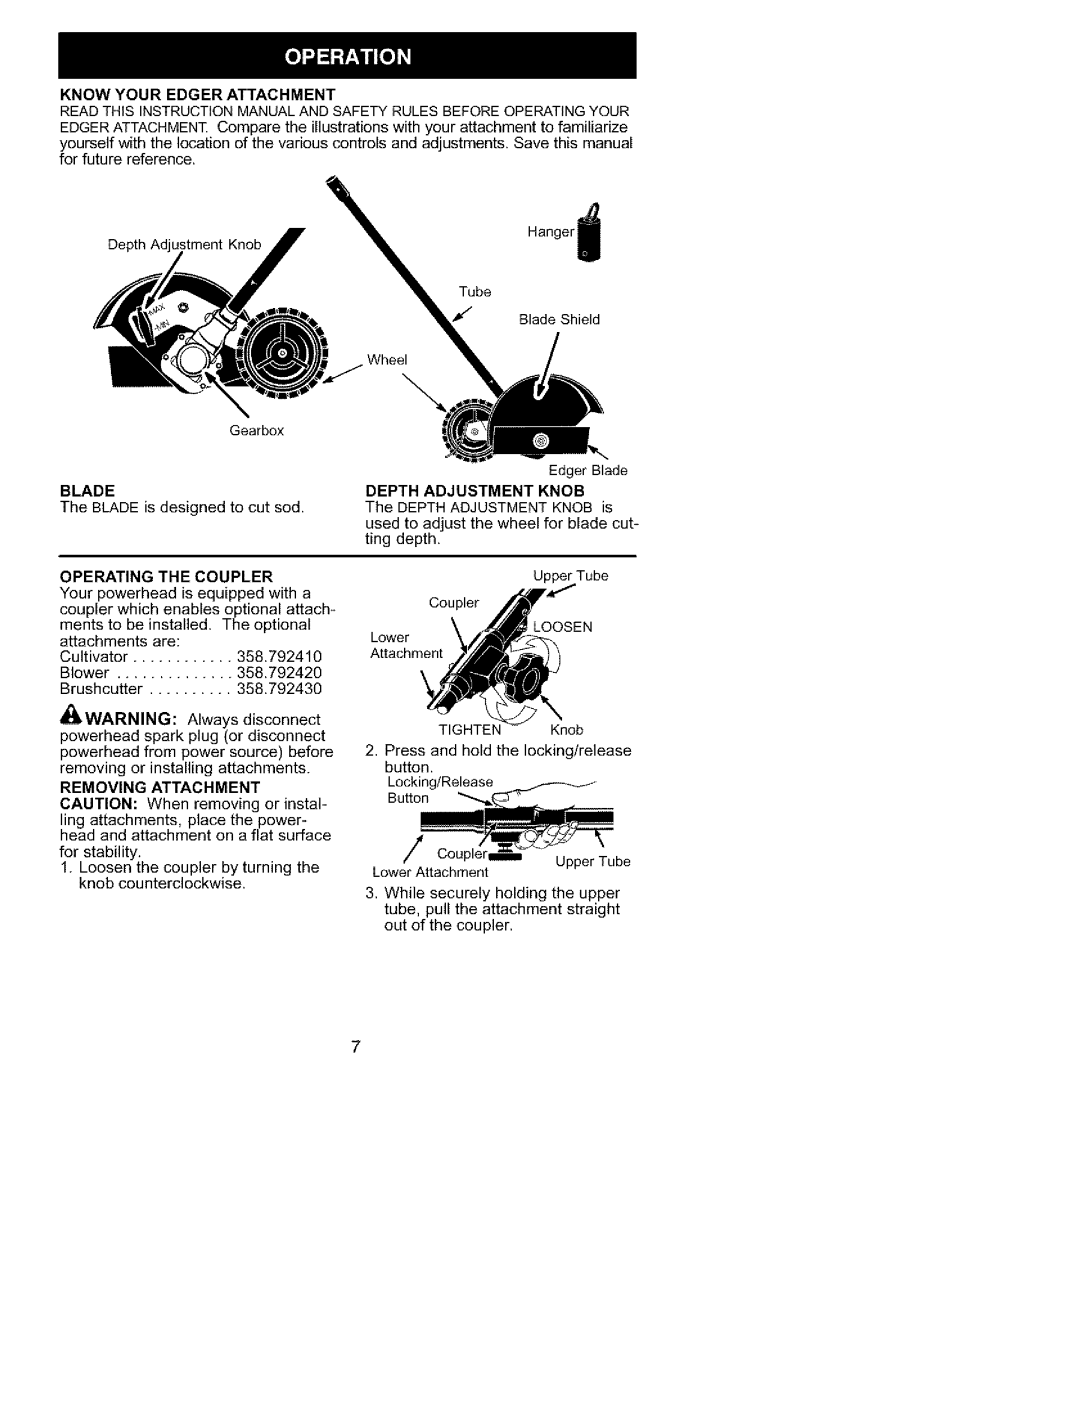 Univex 358.792400 instruction manual Know Your Edger Attachment, Blade, Operating The Coupler 